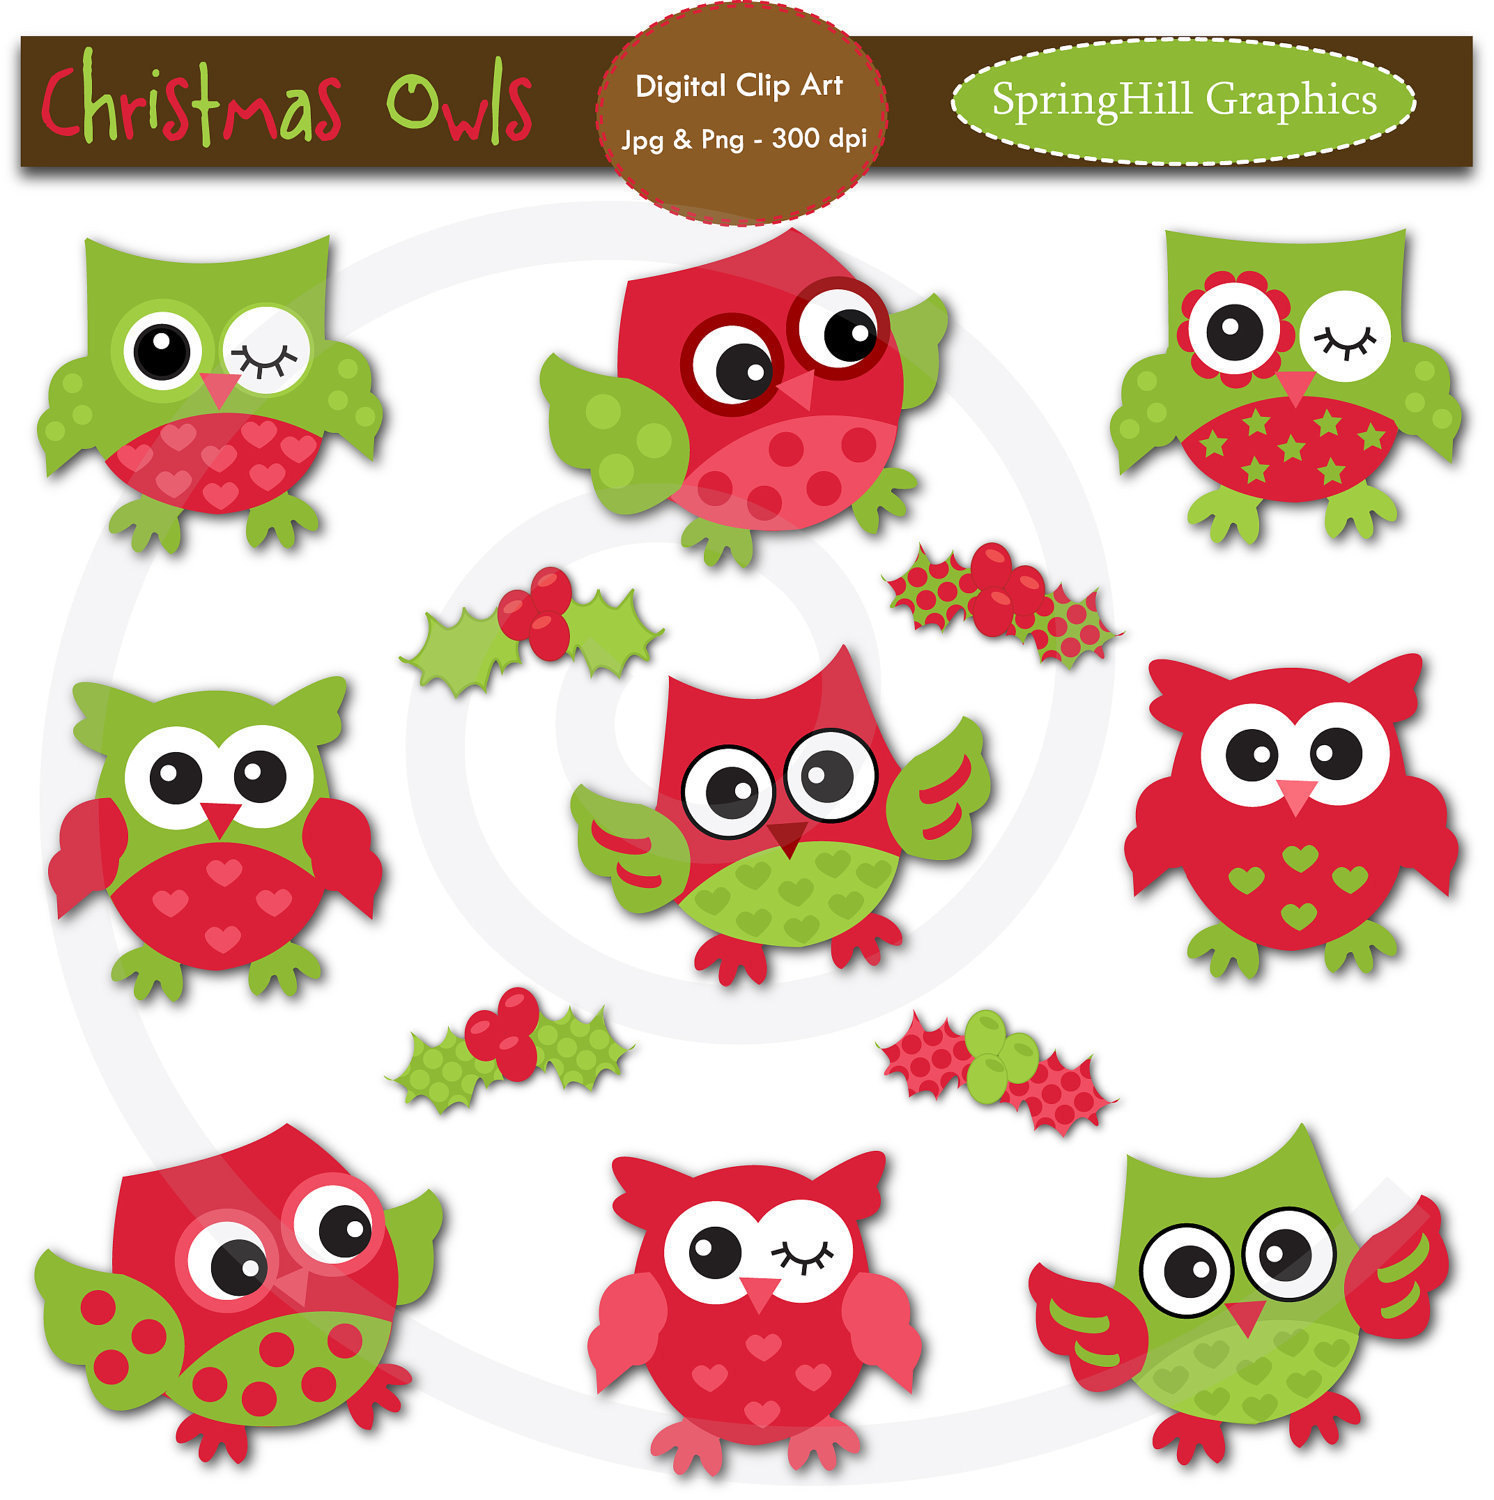 Free Whimsical Owl Clip Art Submited Images   Pic2fly